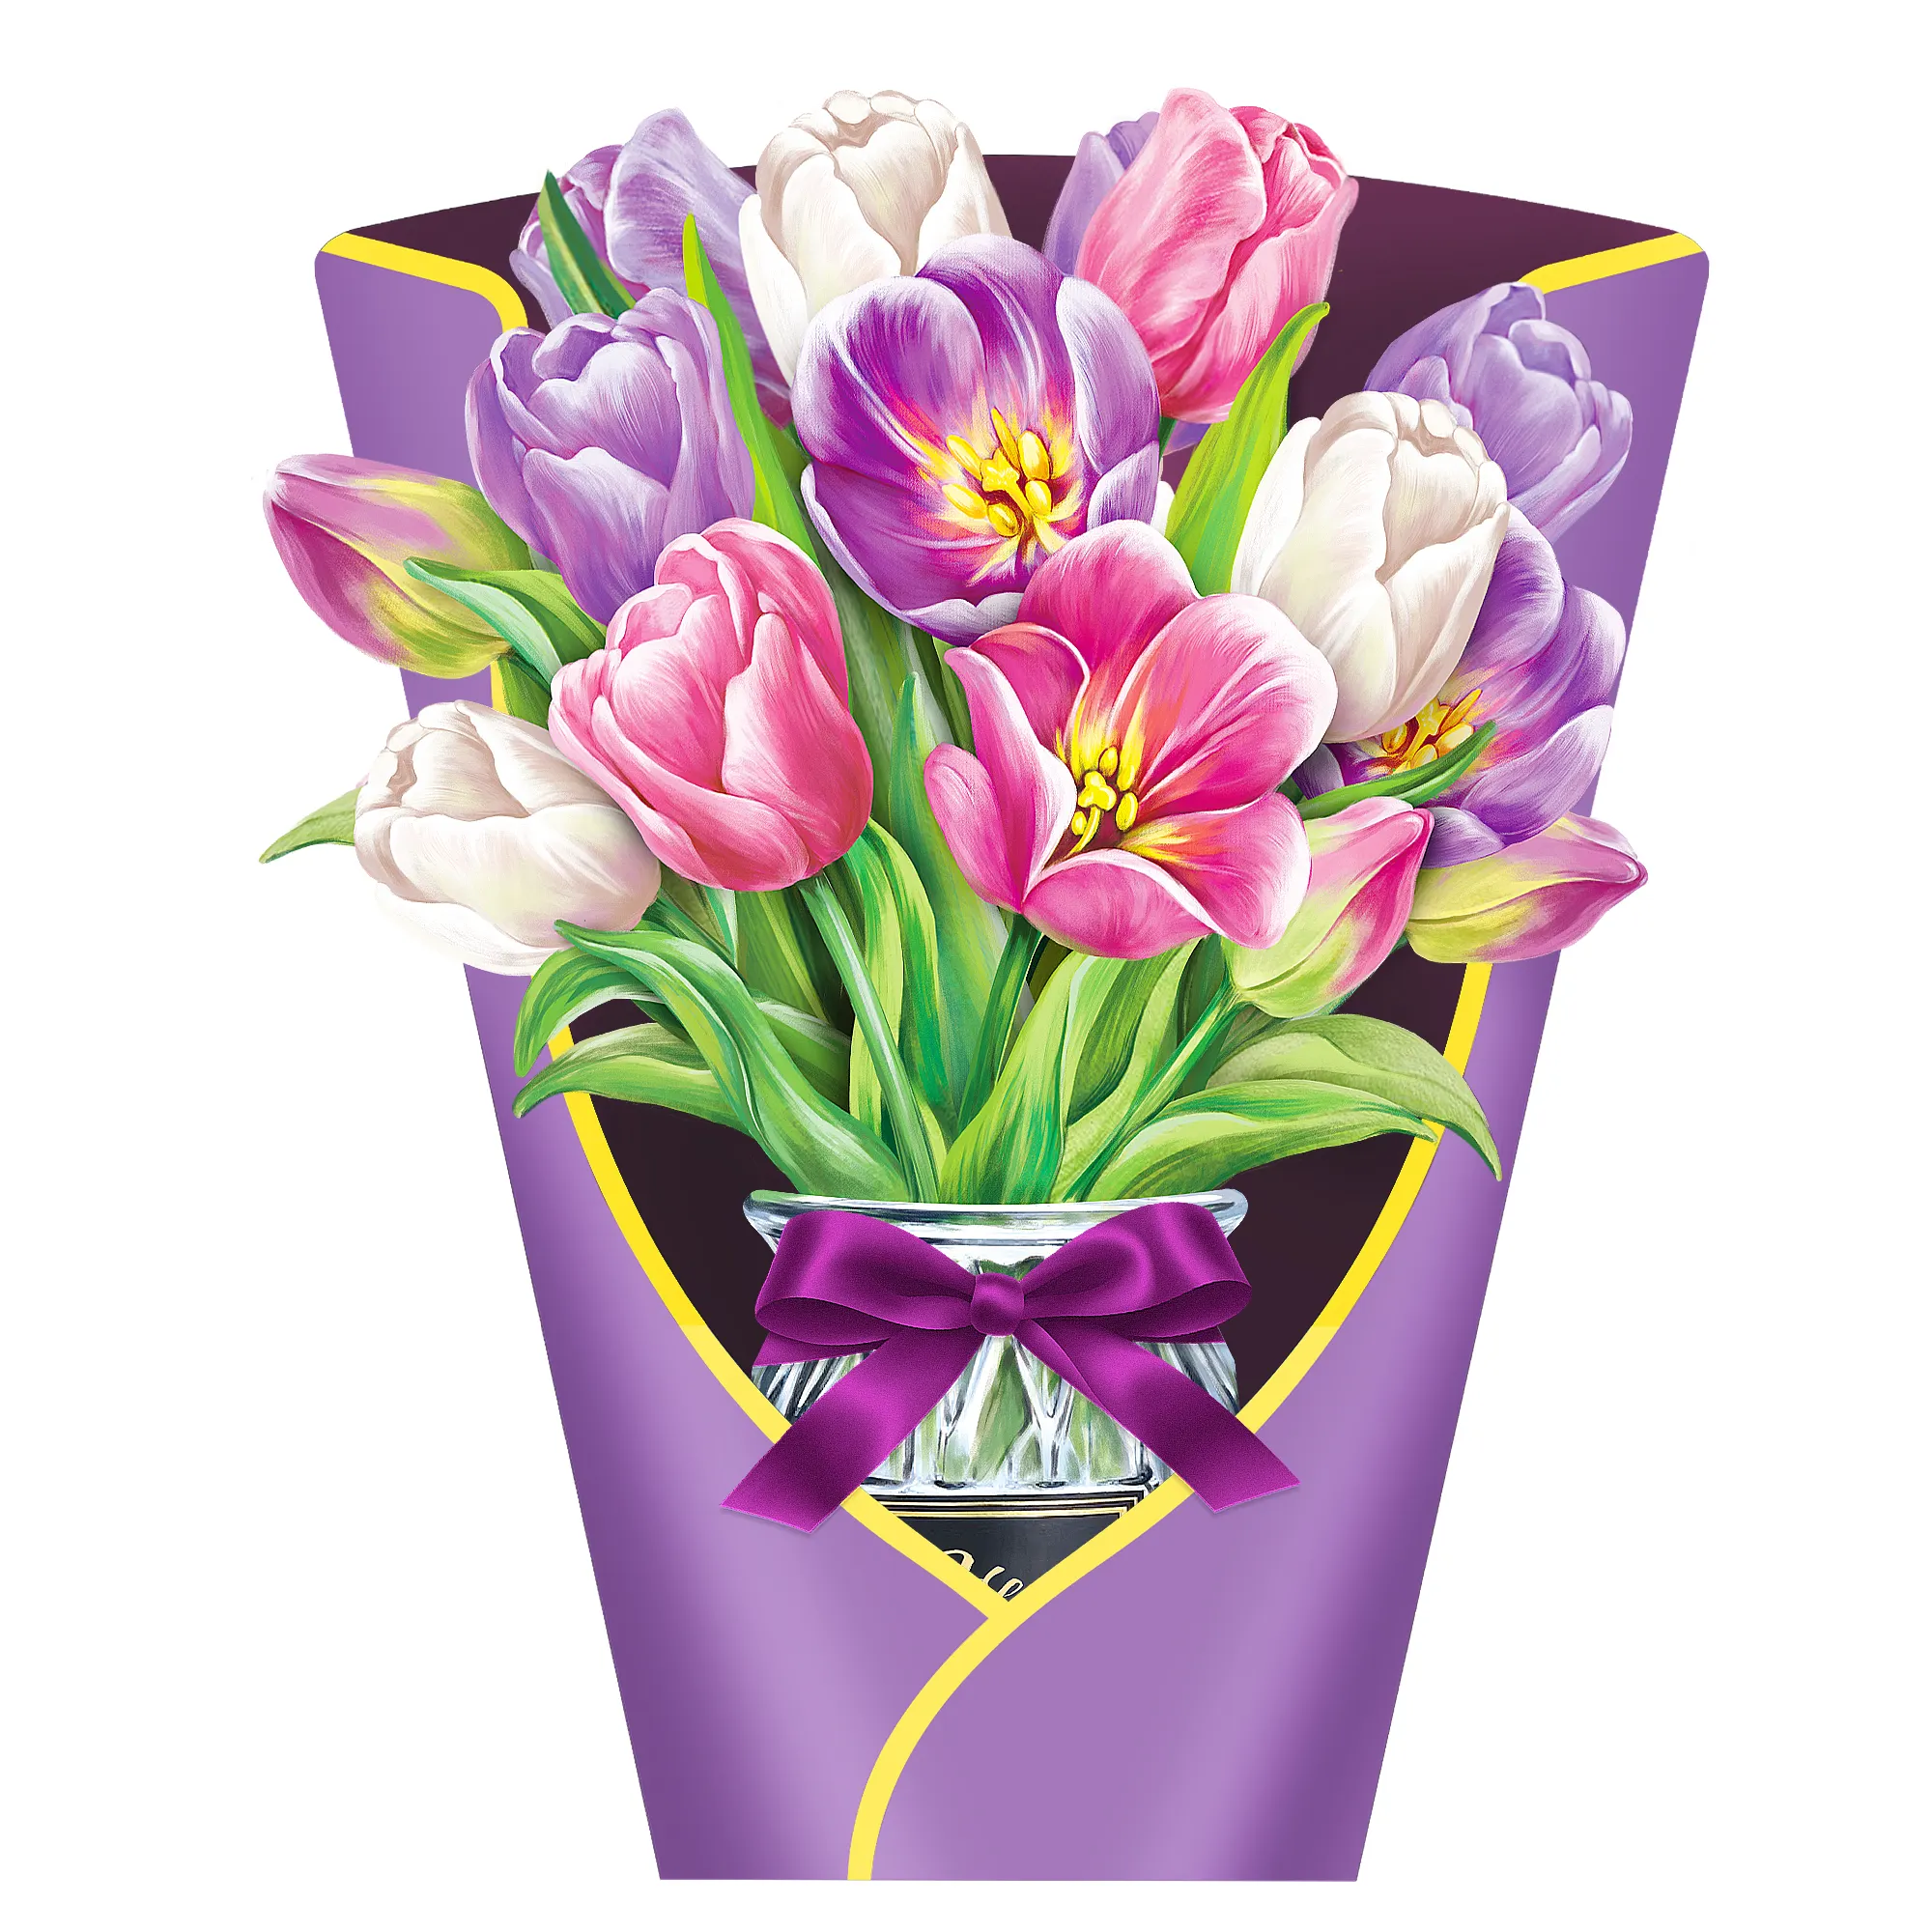 Custom Design 3D Pop Up Paper Flower Bouquet Greeting Cards For Mother's Day Birthday Day Or Business